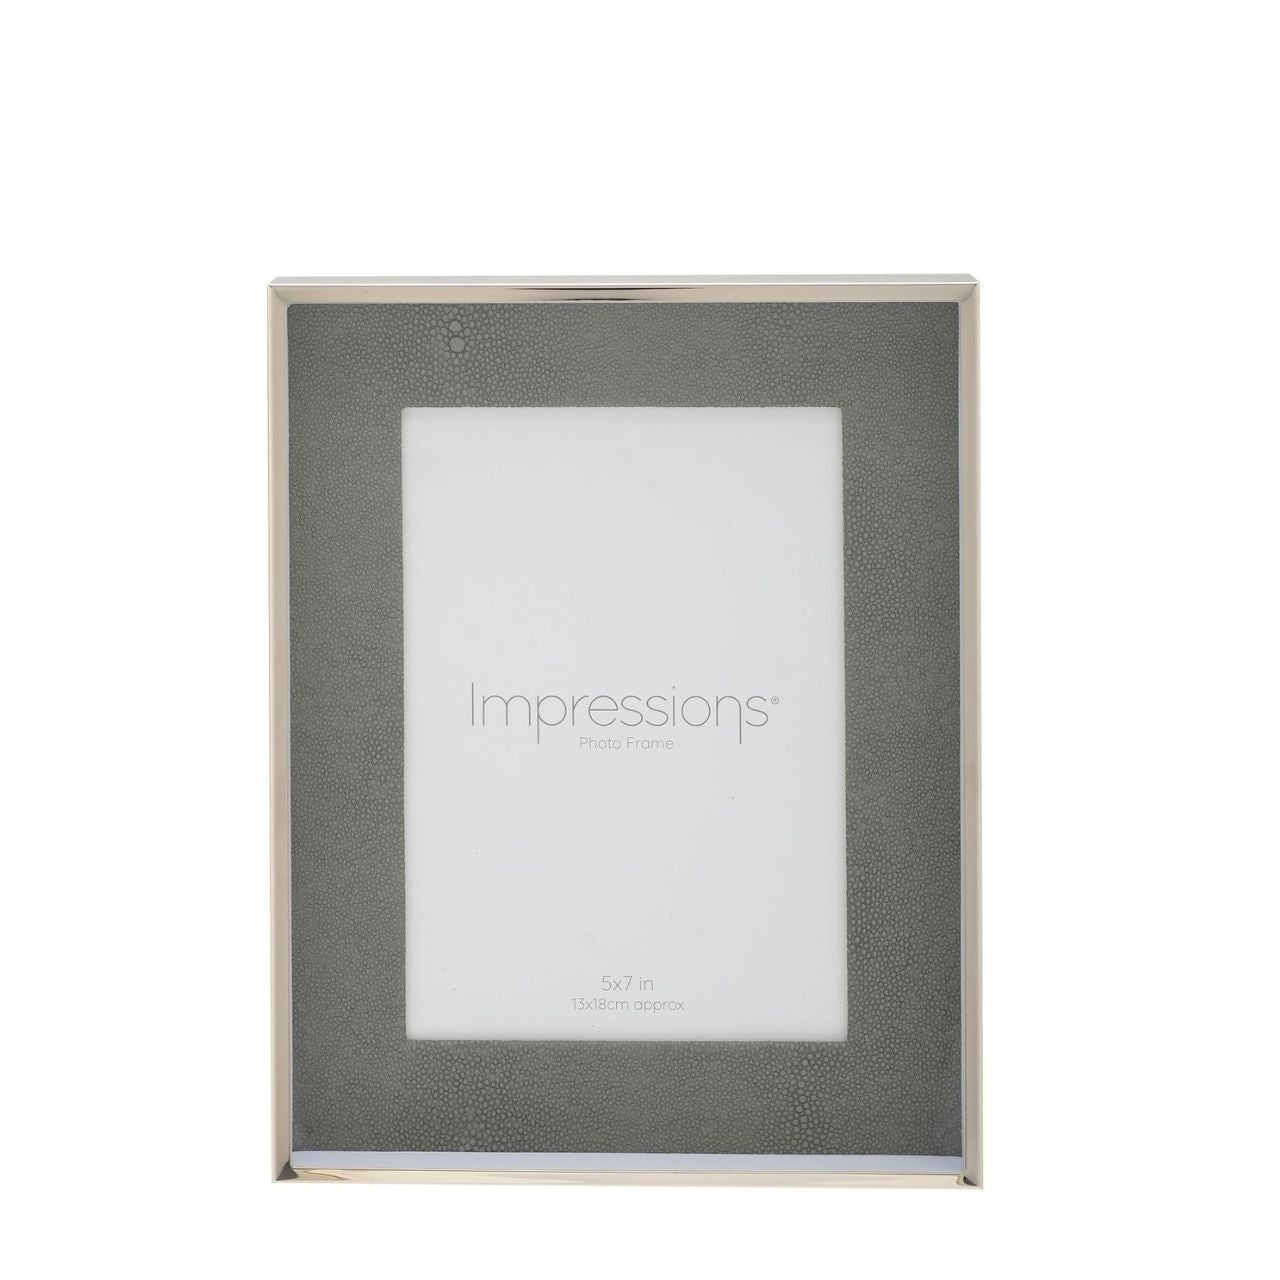 Faux Croc Detail Frame Soft Grey 5" x 7"  A silver & soft grey faux croc photo frame.  This stylish frame offers a unique twist on the conventional that would complement both traditional and modern home decors.